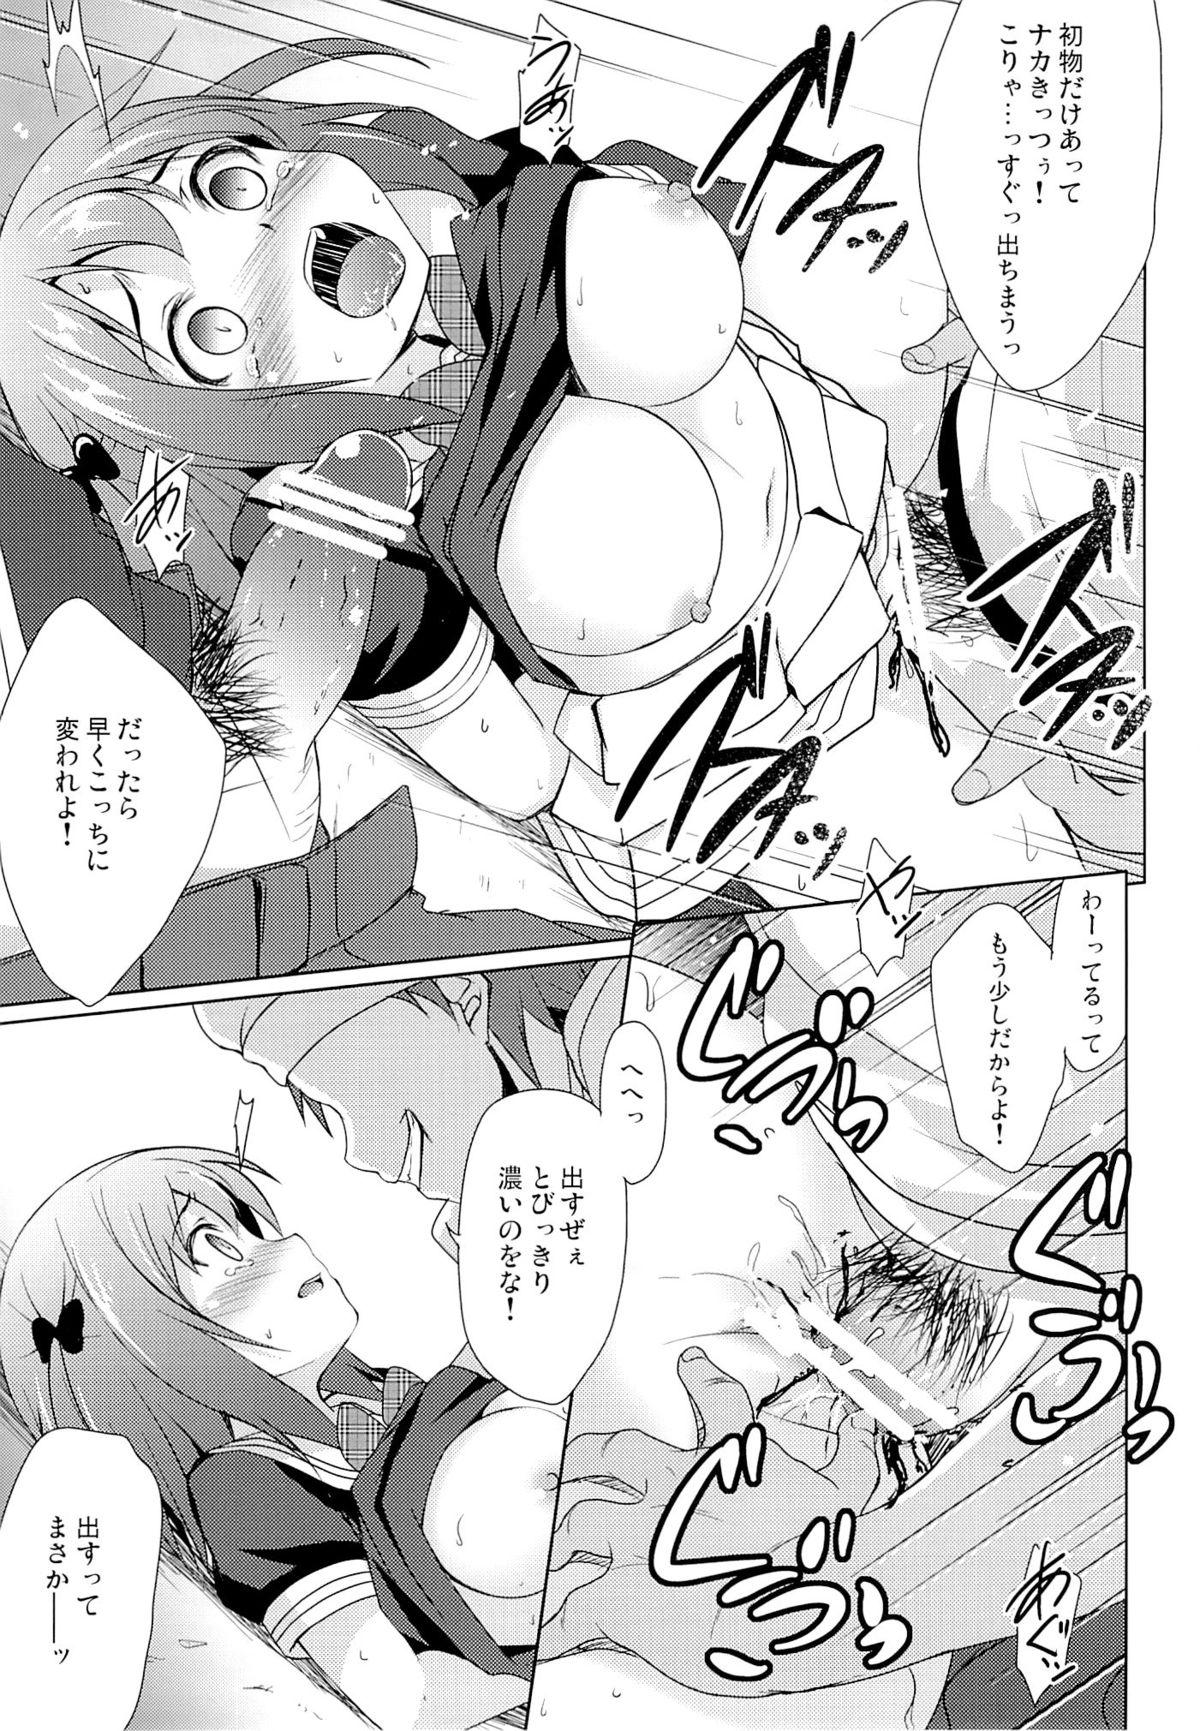 Chii-chan to Bad End. 10